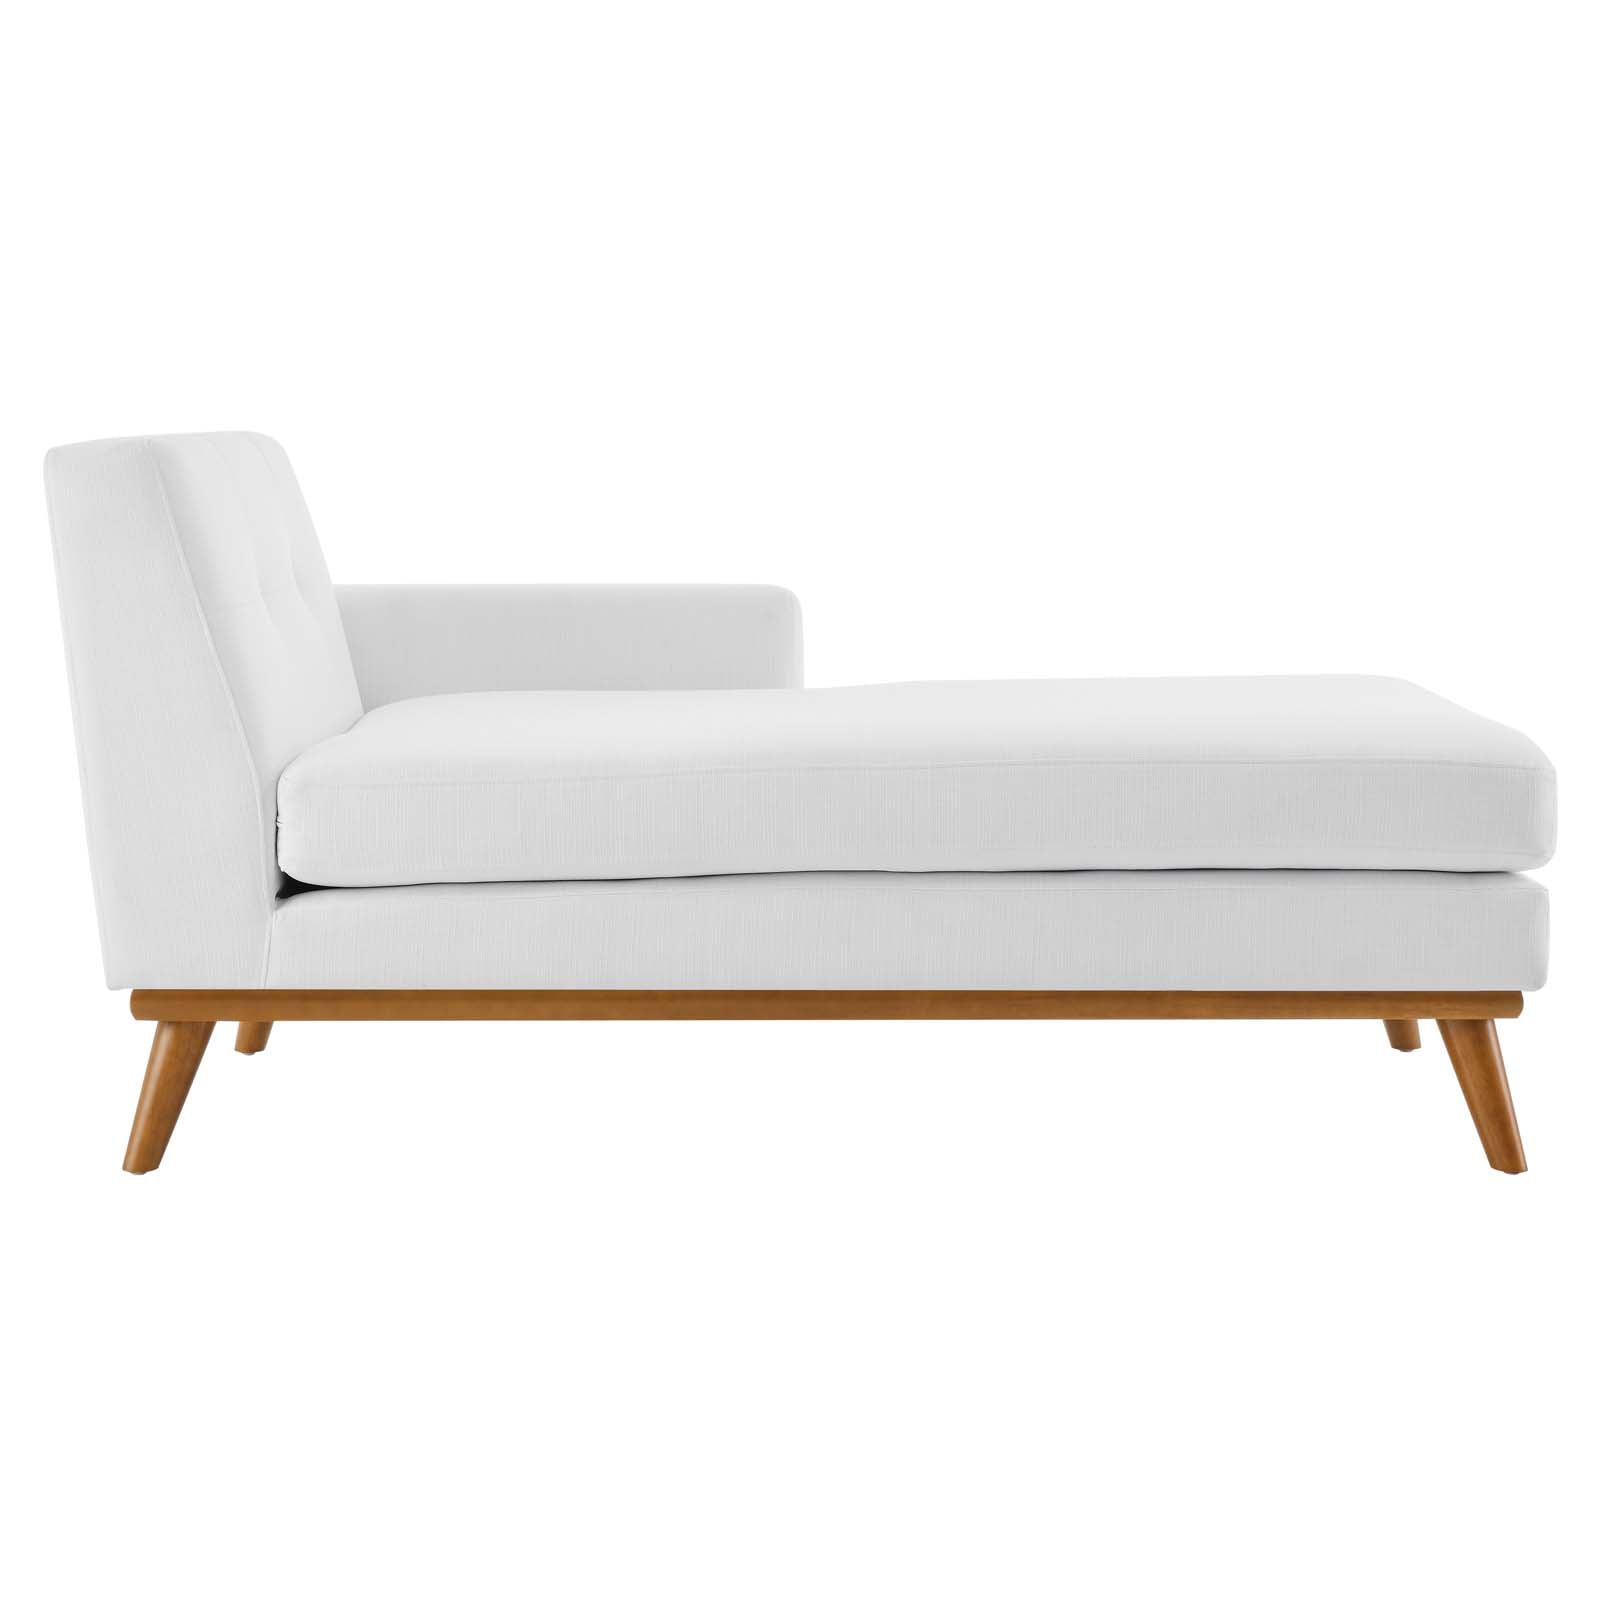 Engage Right-Facing Chaise